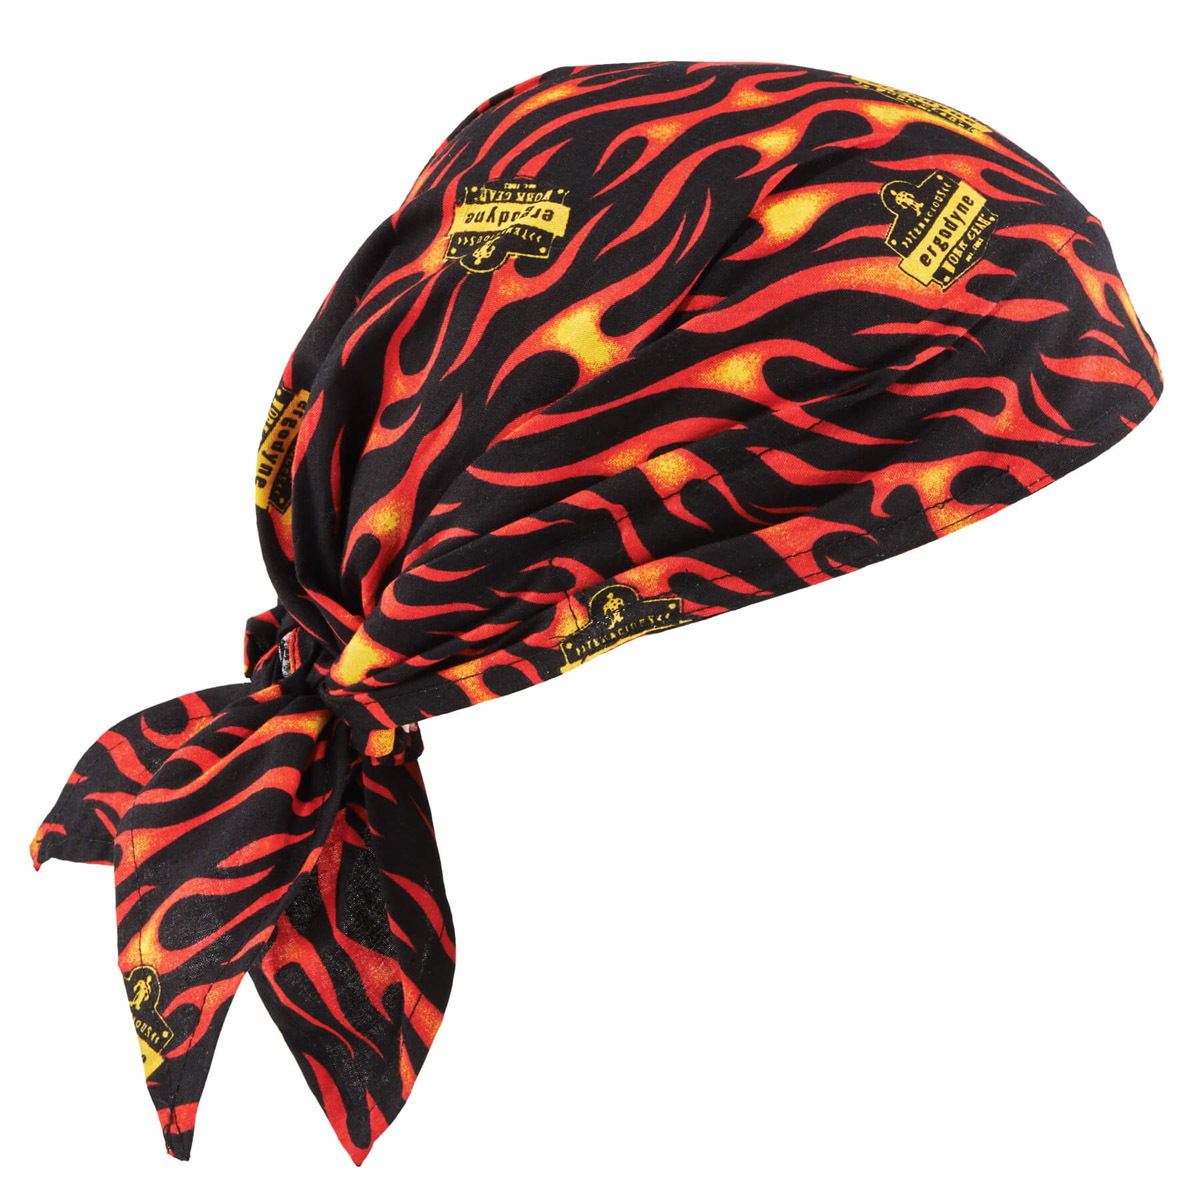 Ergodyne Flames Chill-Its® 6710 Cotton/Polymer Evaporative Cooling Hat